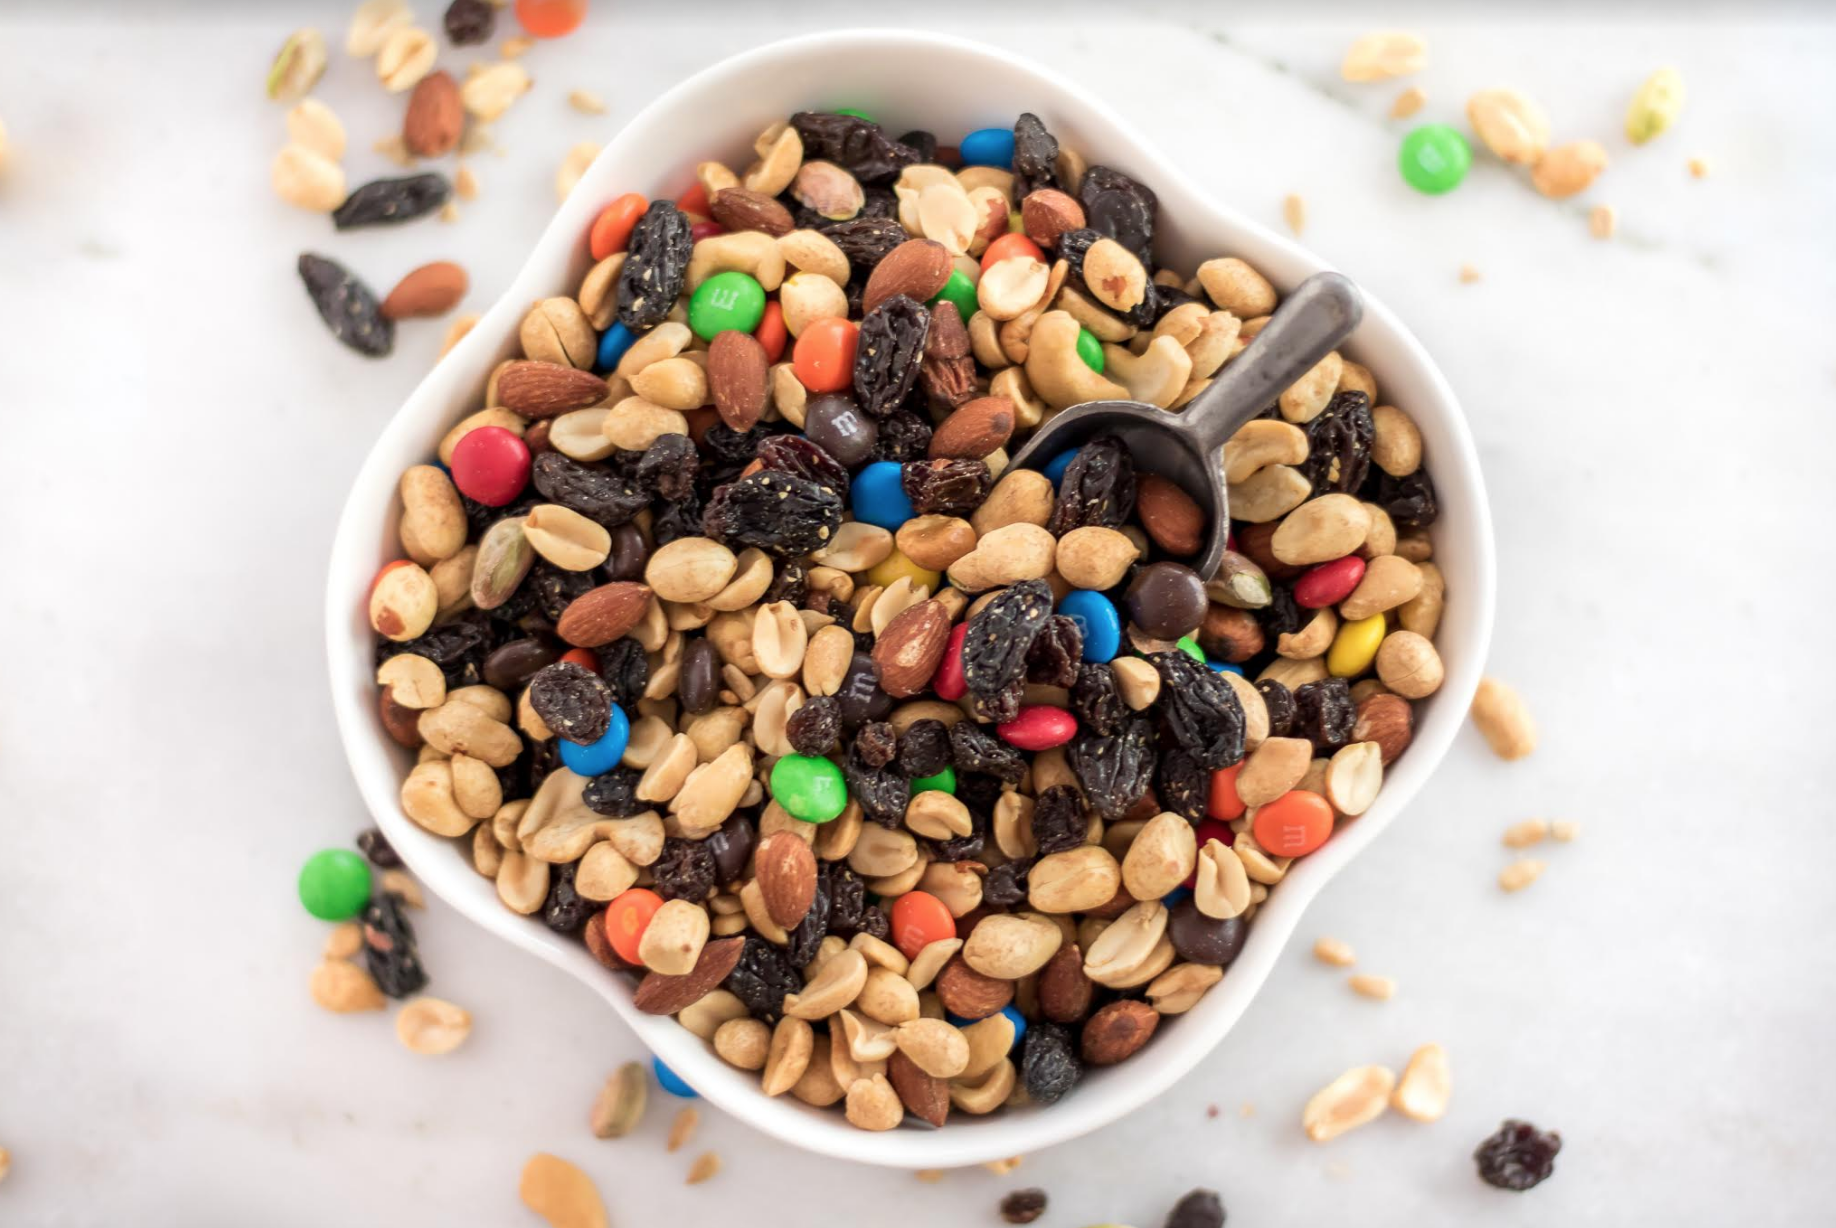 Sweet and Salty Trail Mix